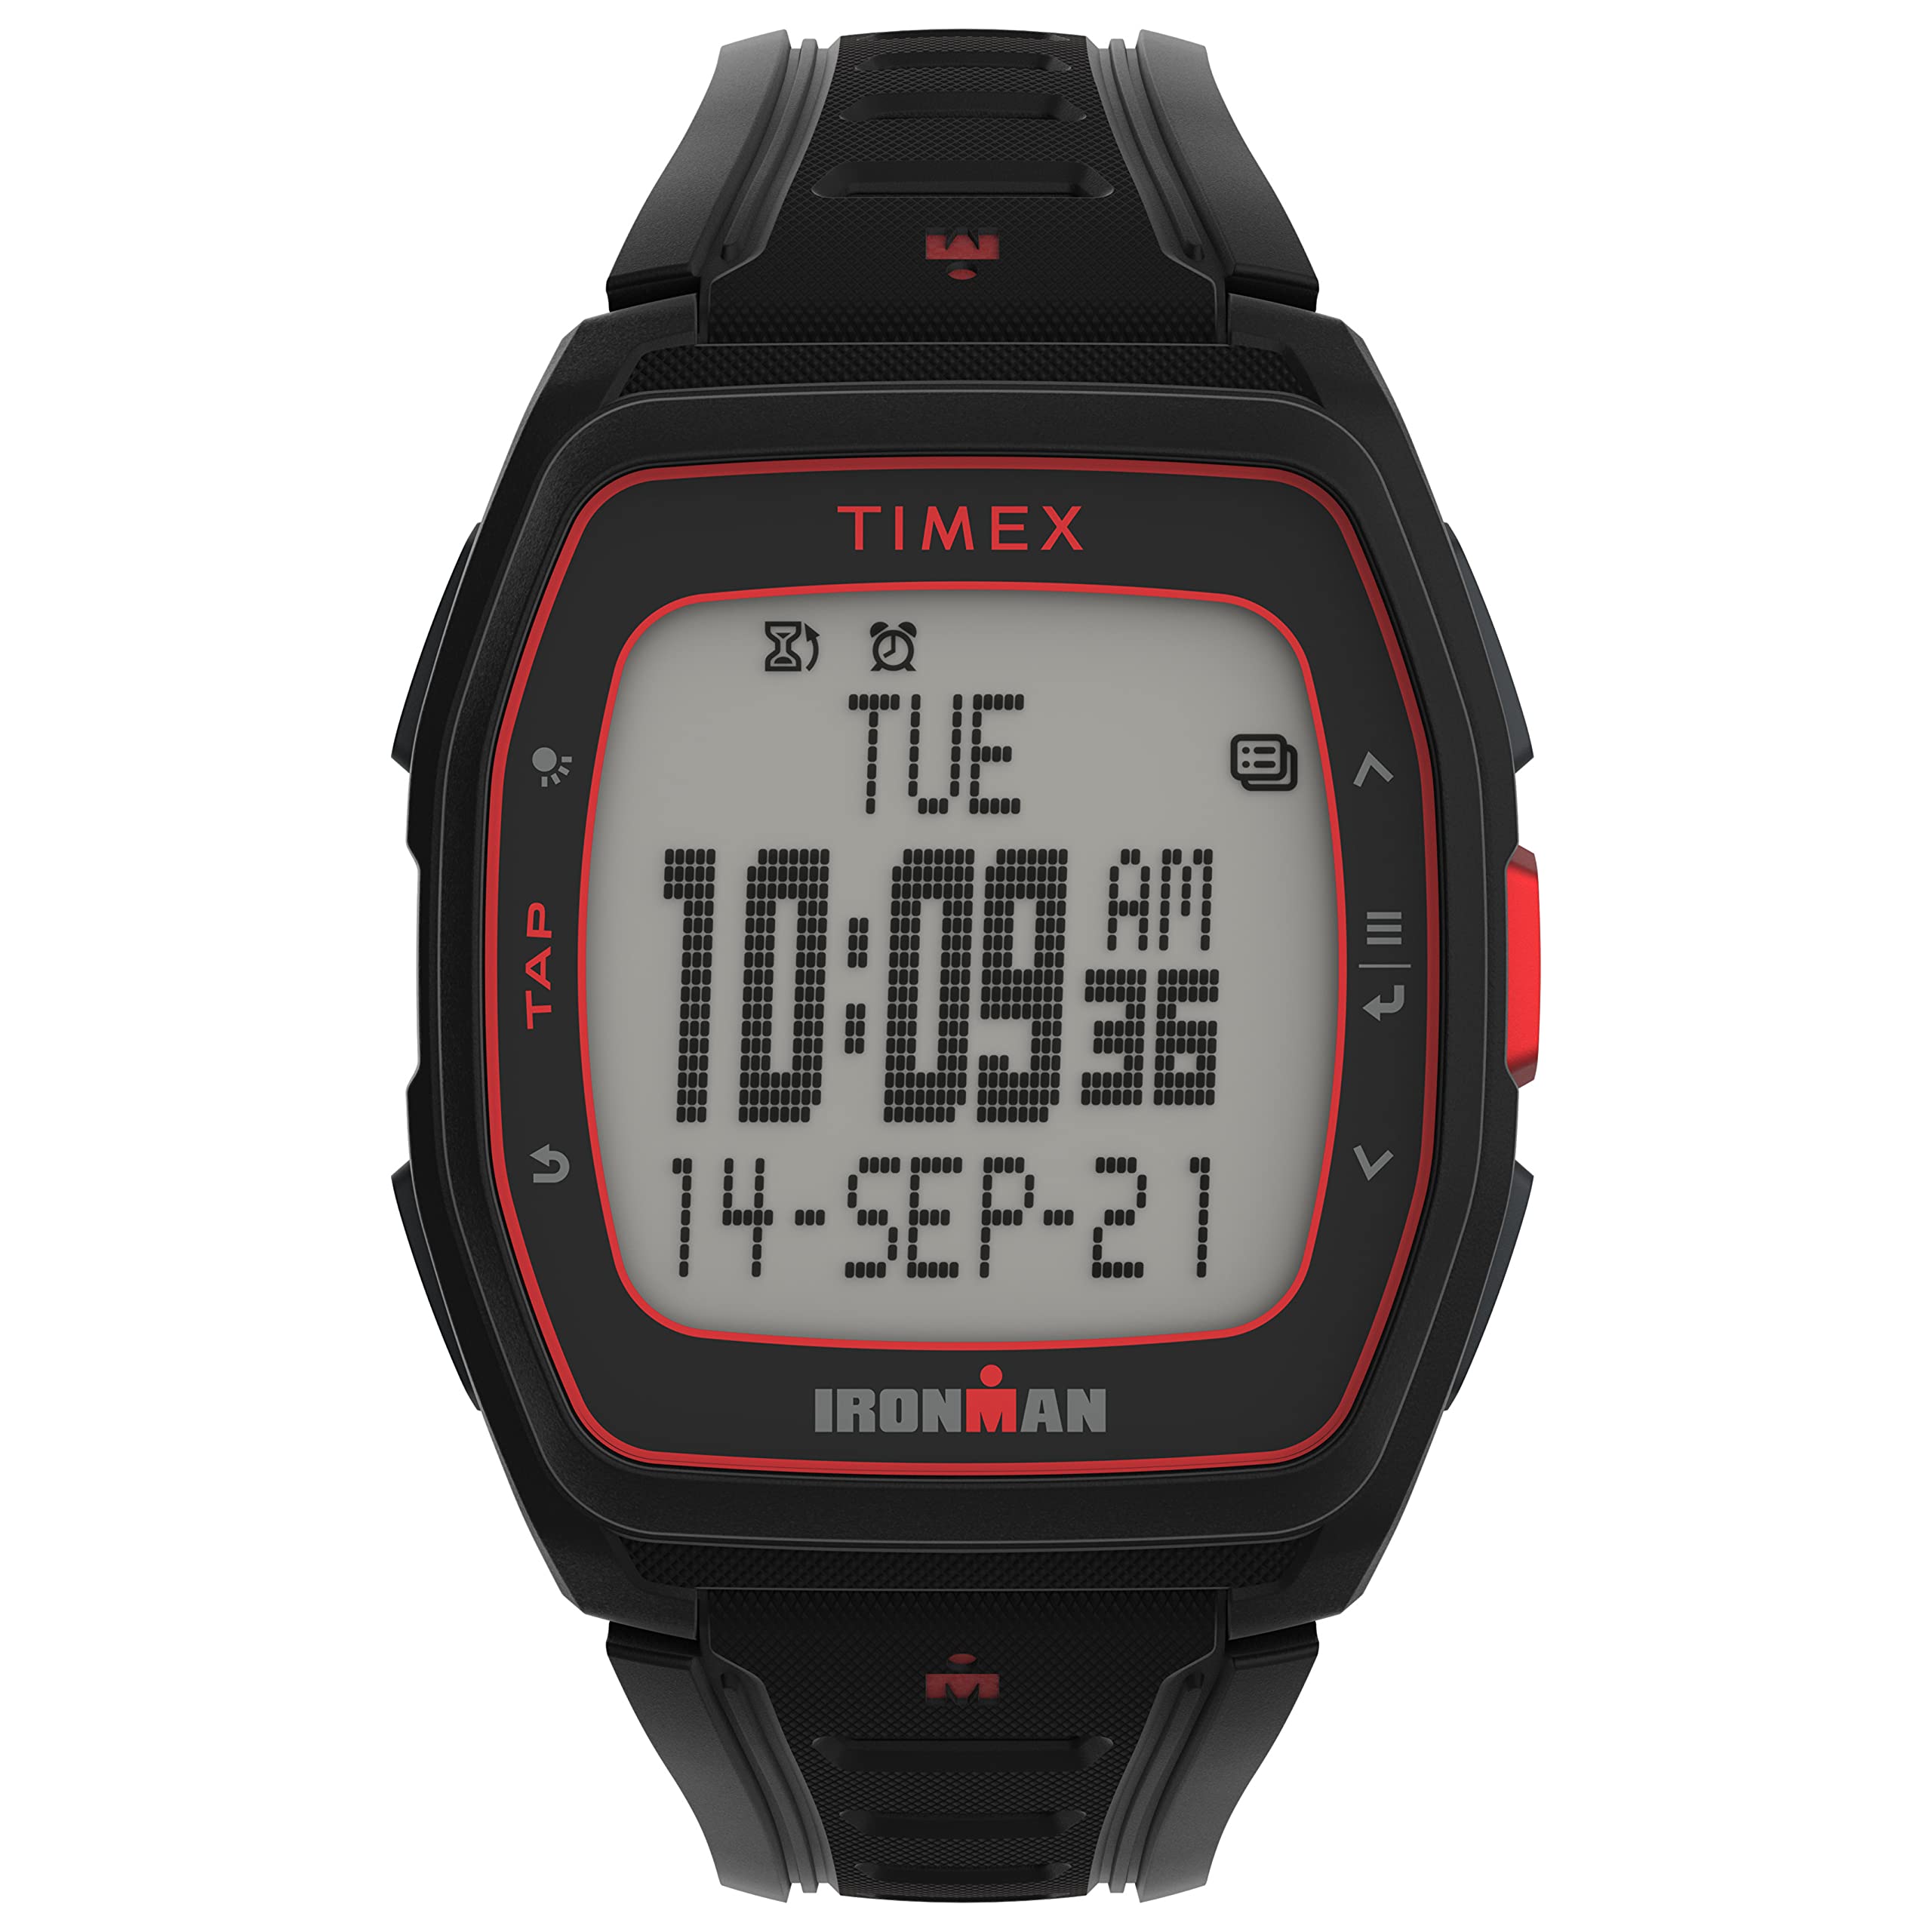 TIMEX Ironman T300 41mm Watch with Performance Pacer, Hydration Alerts & Interval Timers